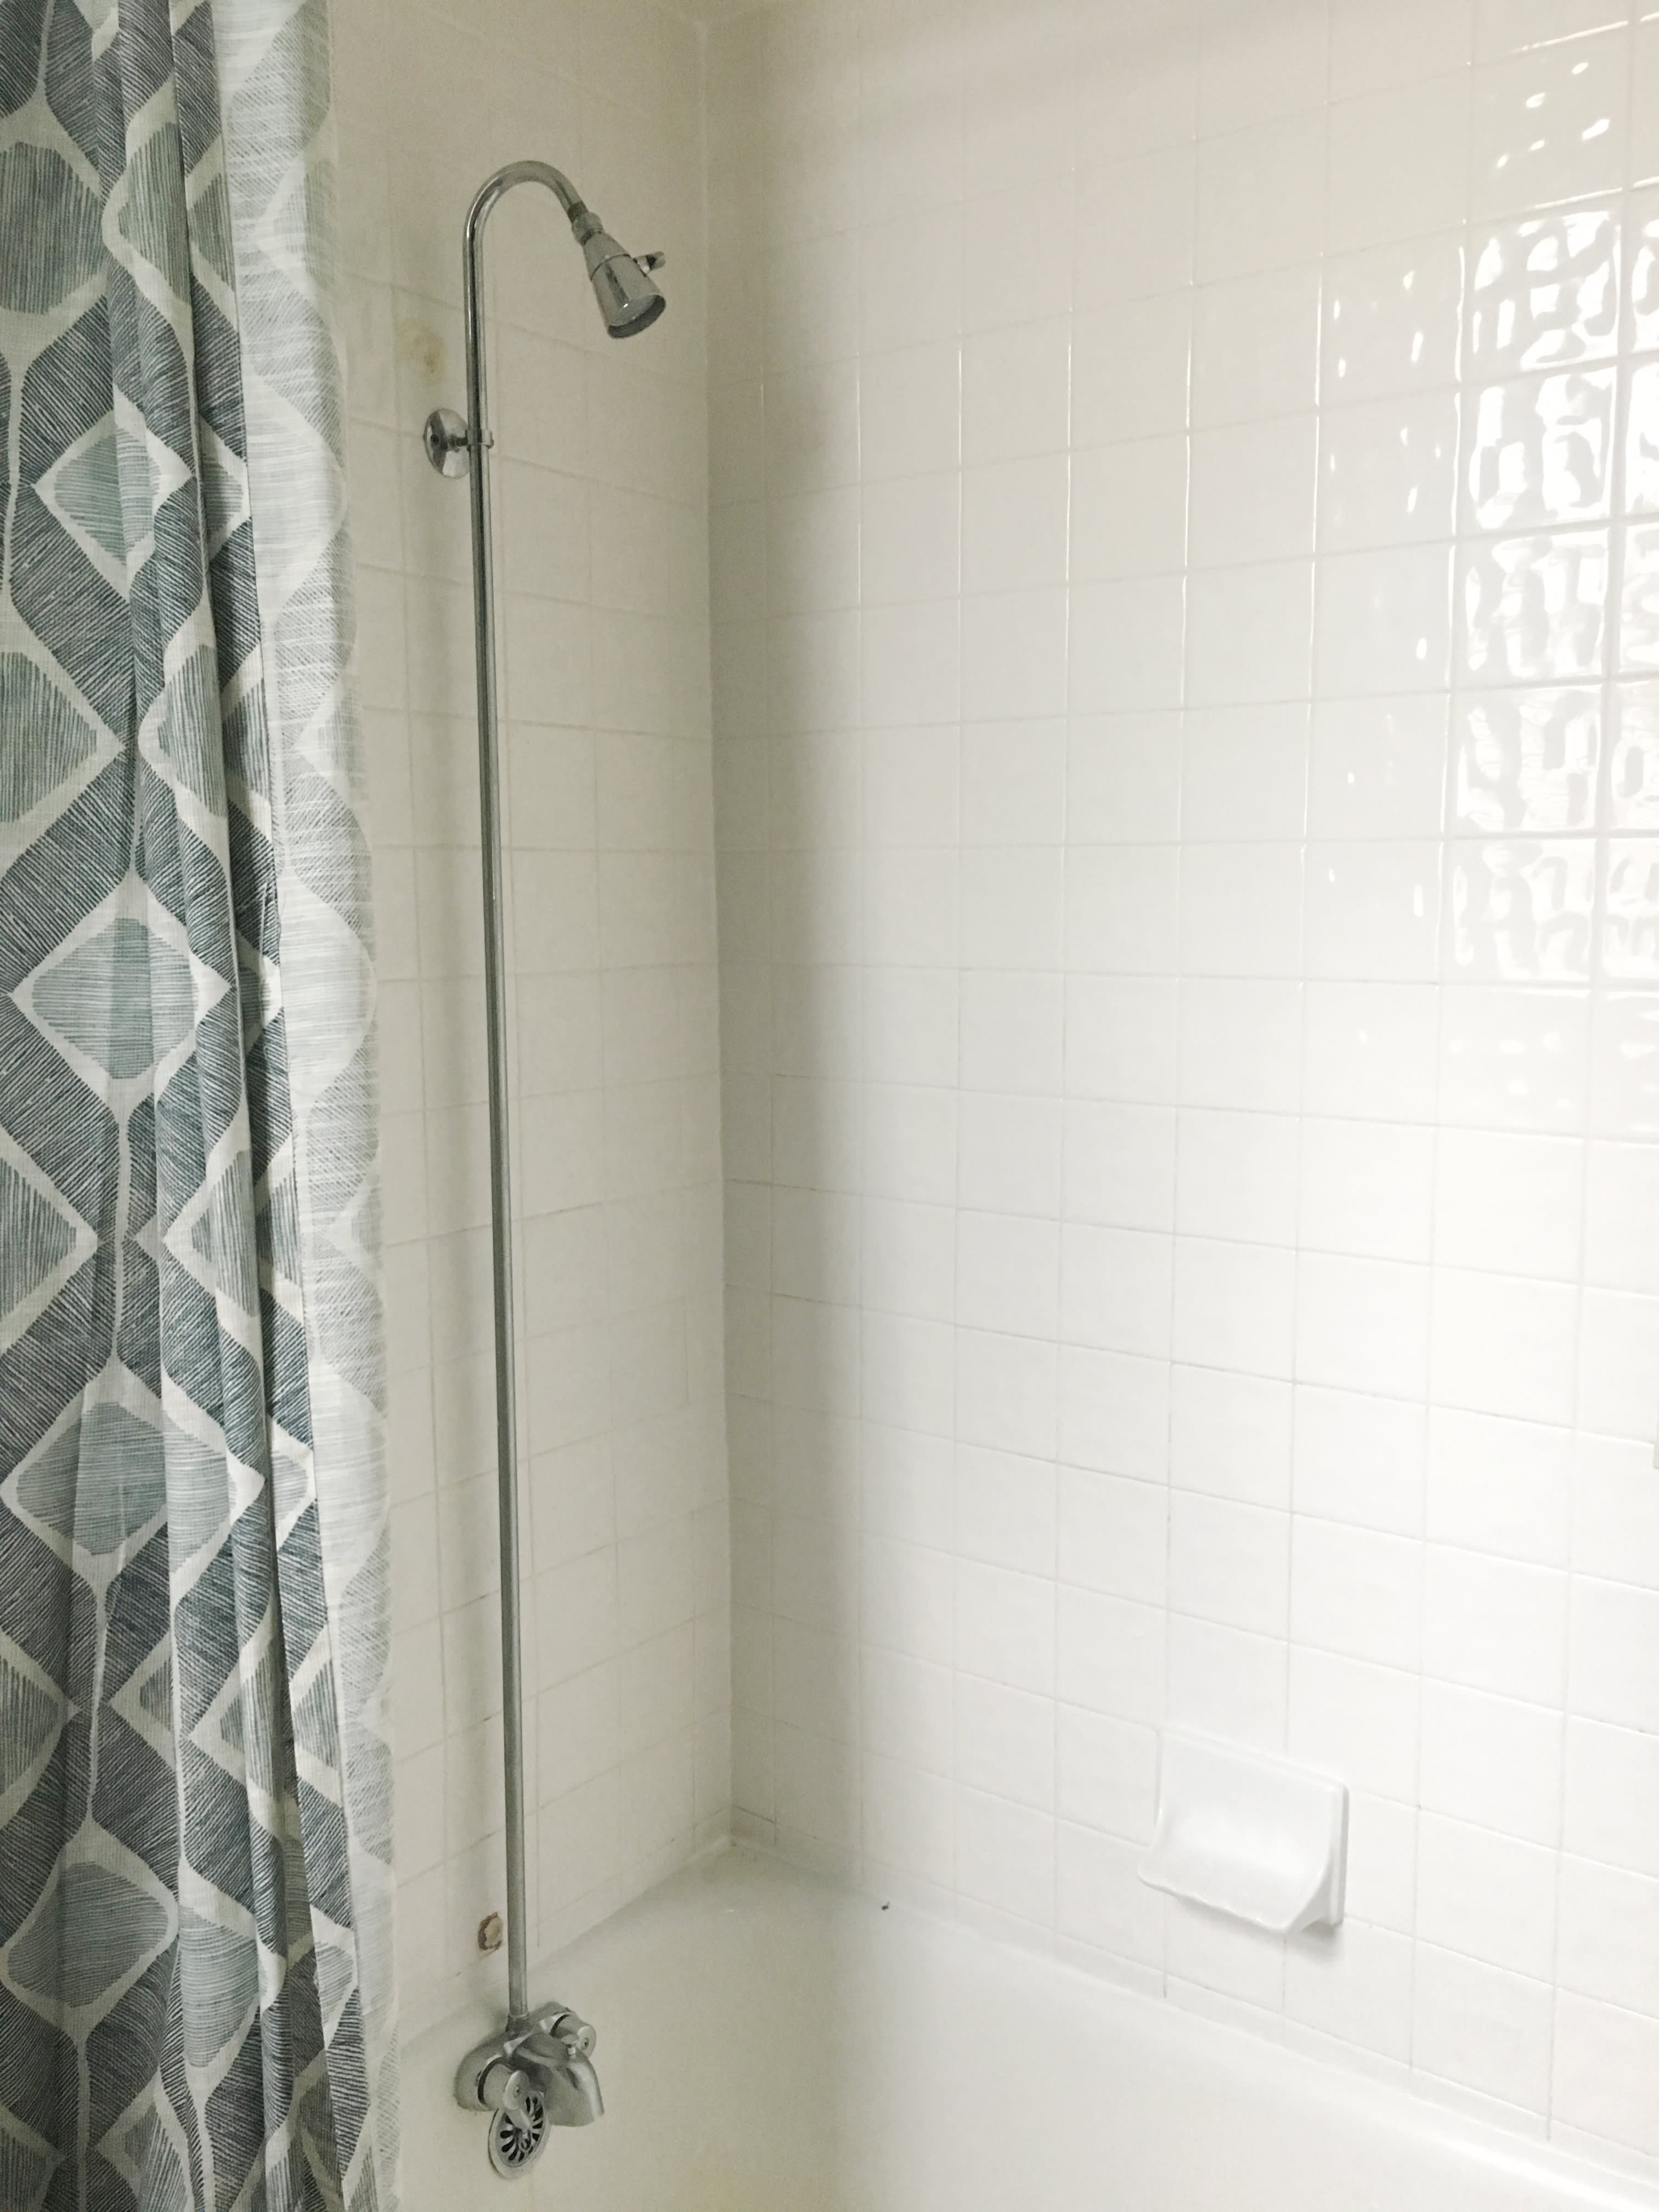 Our Tile and Grout Cleaners Give This Shower in Keller the Best Makeover